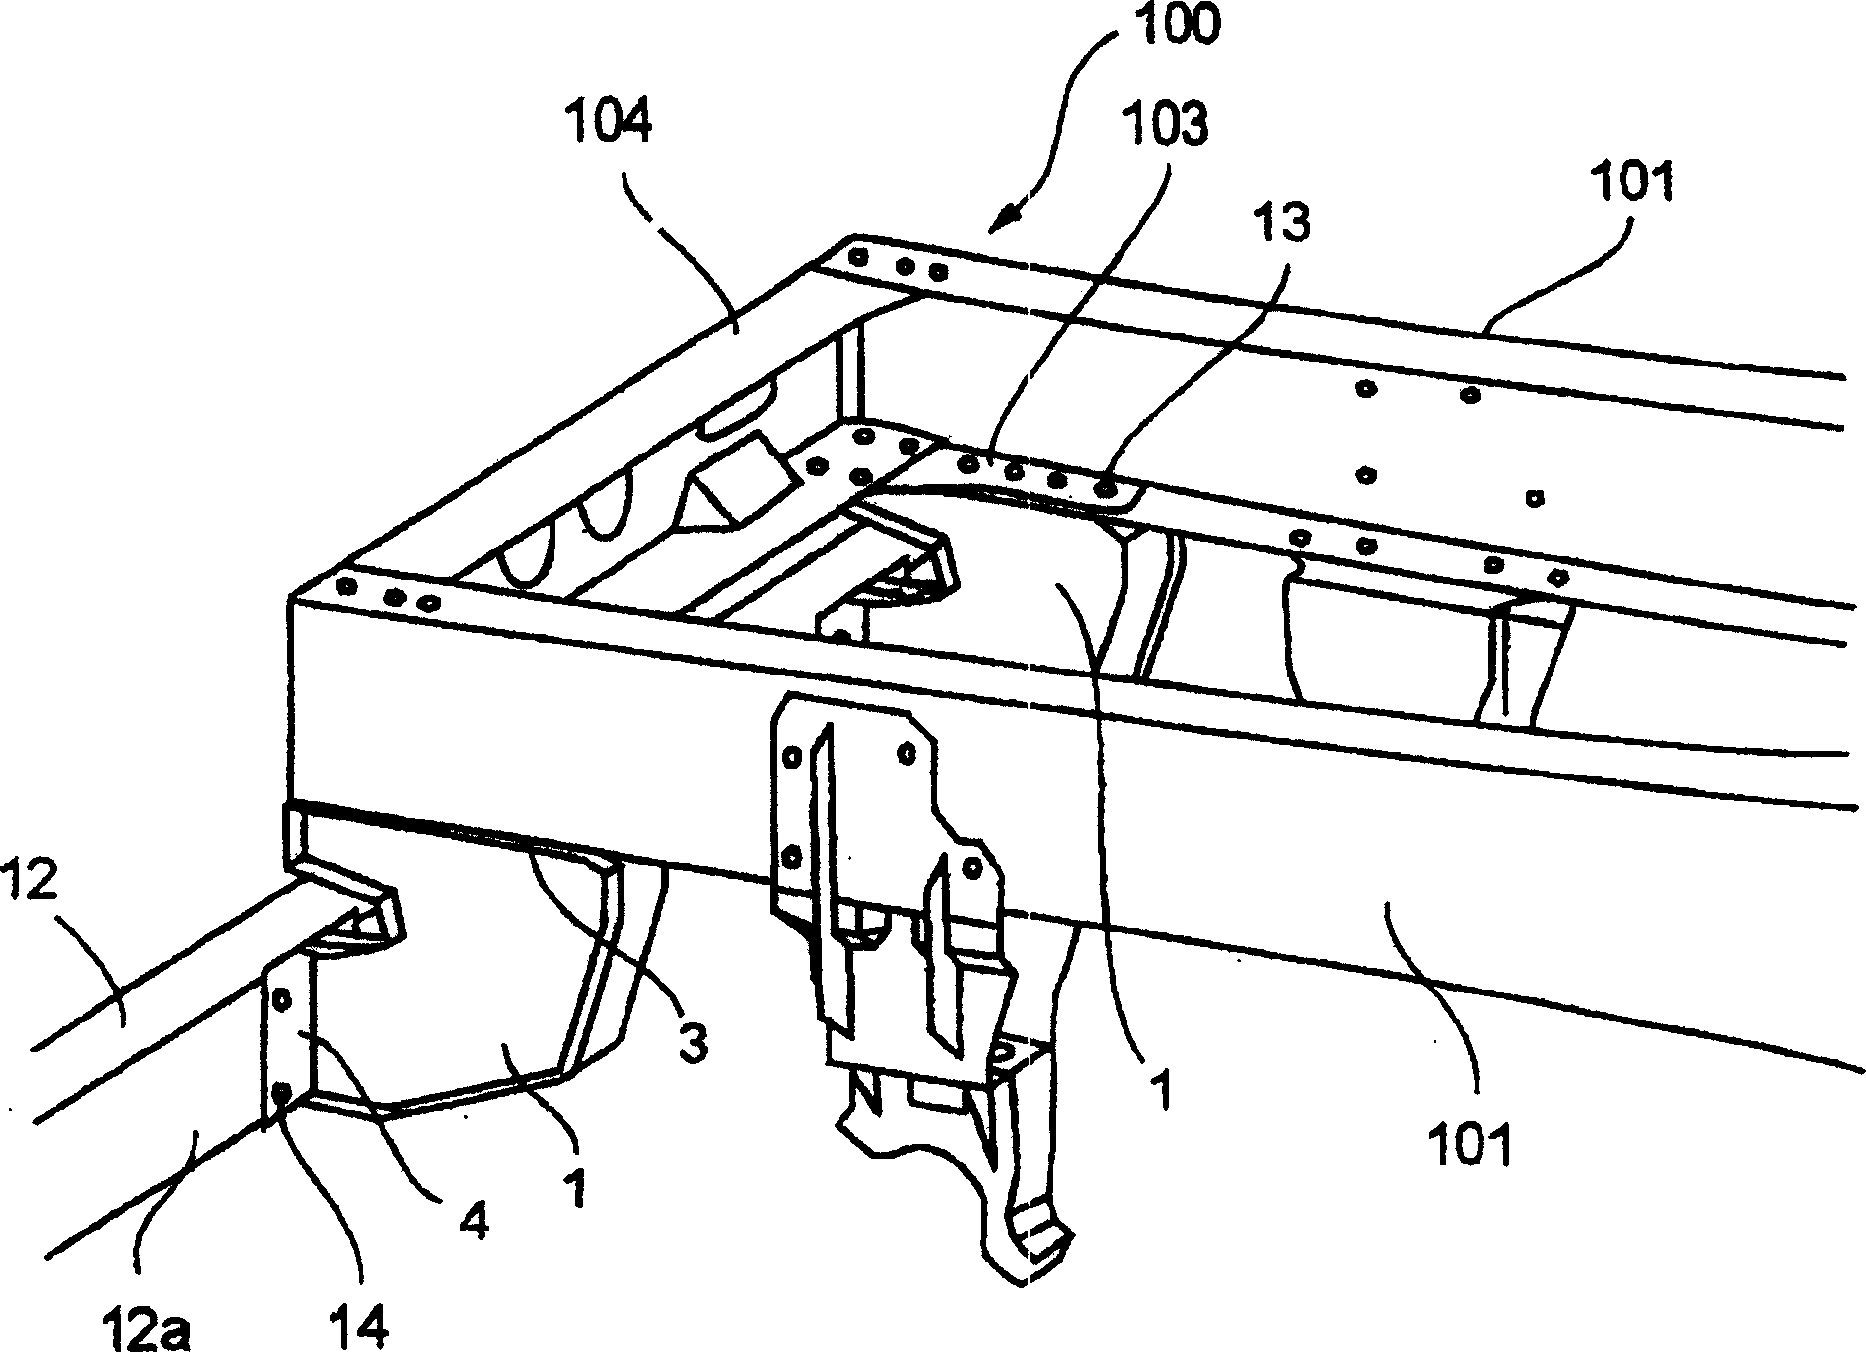 Impact shock absorbing structure of a vehicle